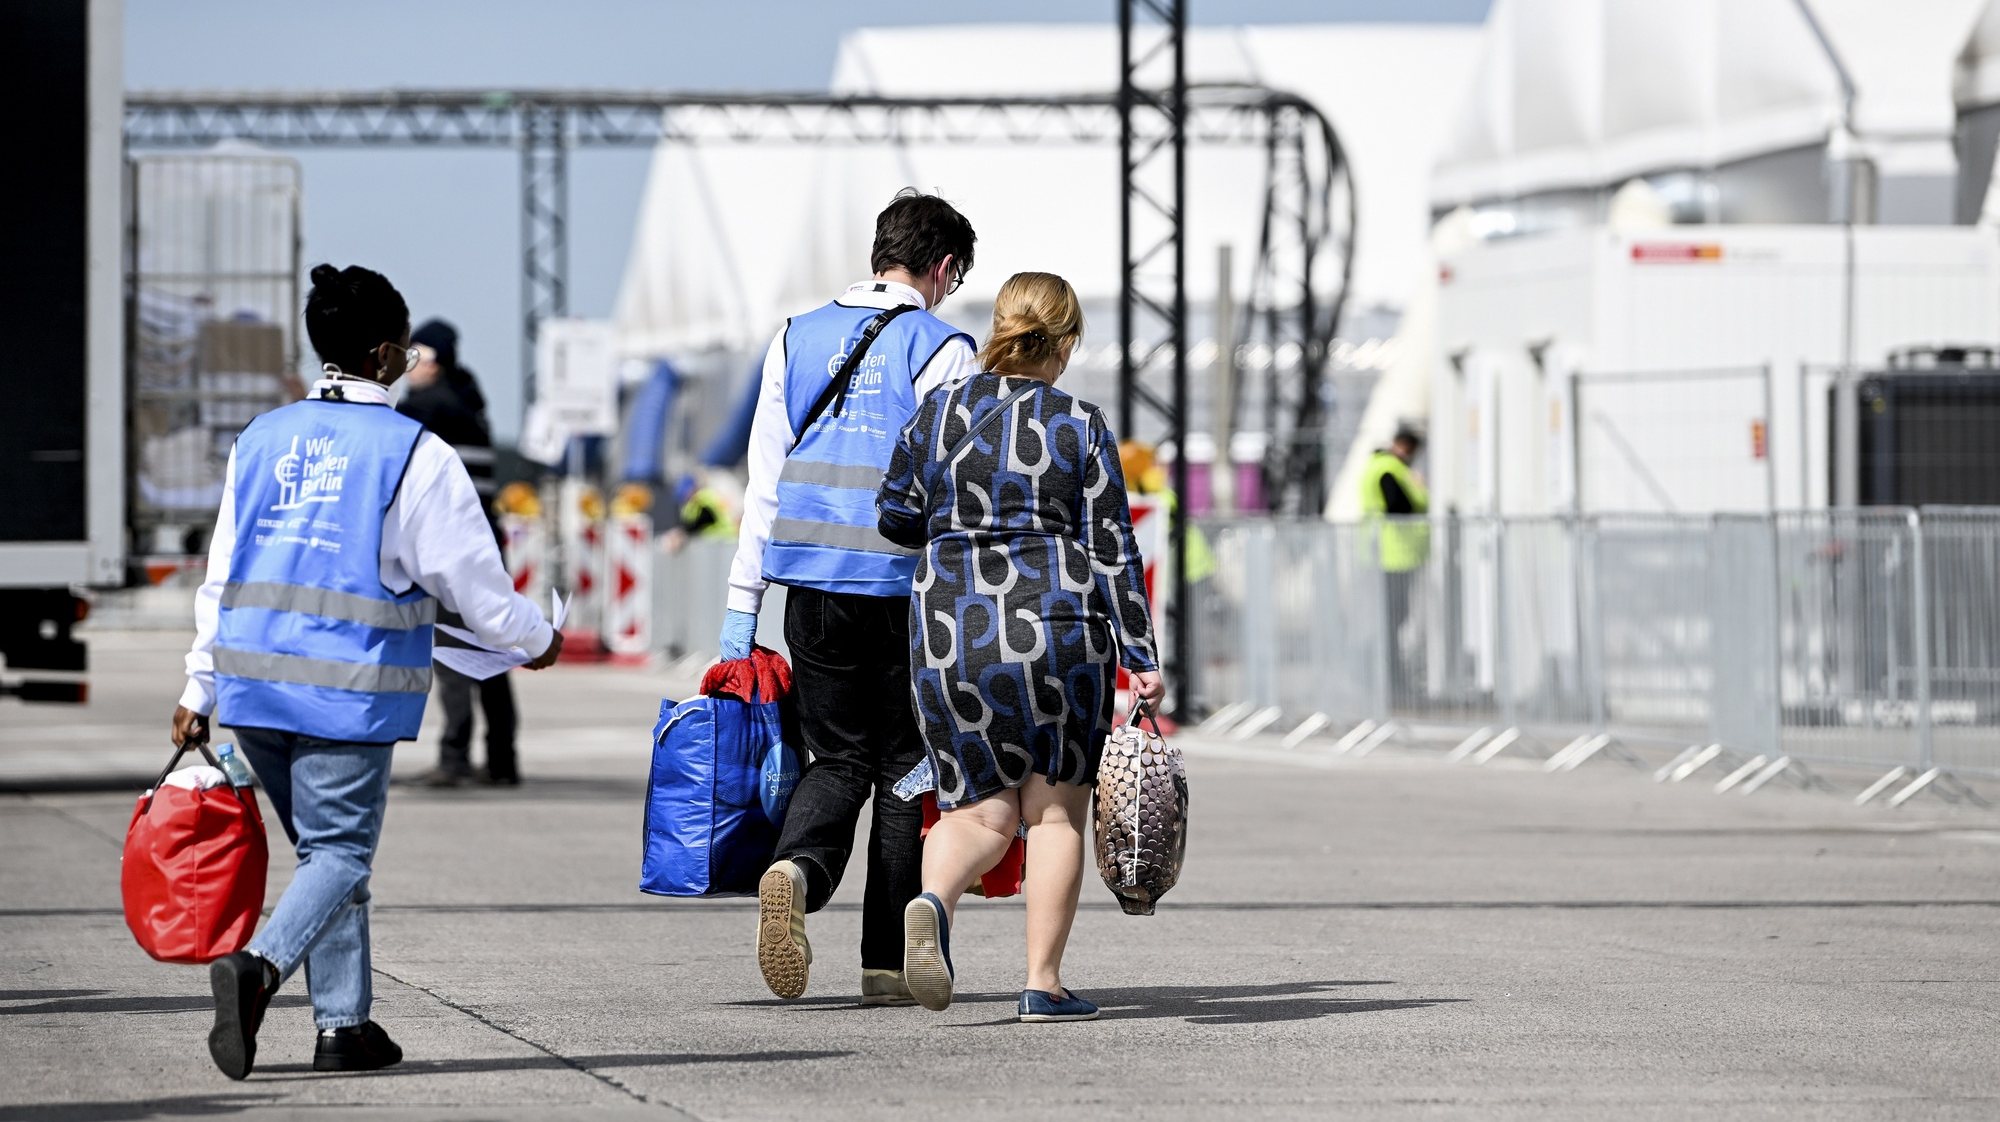 epa10638804 Workers help a woman with her luggage as she arrives at the centre for Ukrainian refugees, at the former Berlin Tegel Airport, in Berlin, Germany, 19 May 2023. The German Red Cross (DRK) has set up an arrival center for refugees in response to their massive arrival in Germany, at the beginning of the Ukrainian crisis in March 2022.  EPA/FILIP SINGER